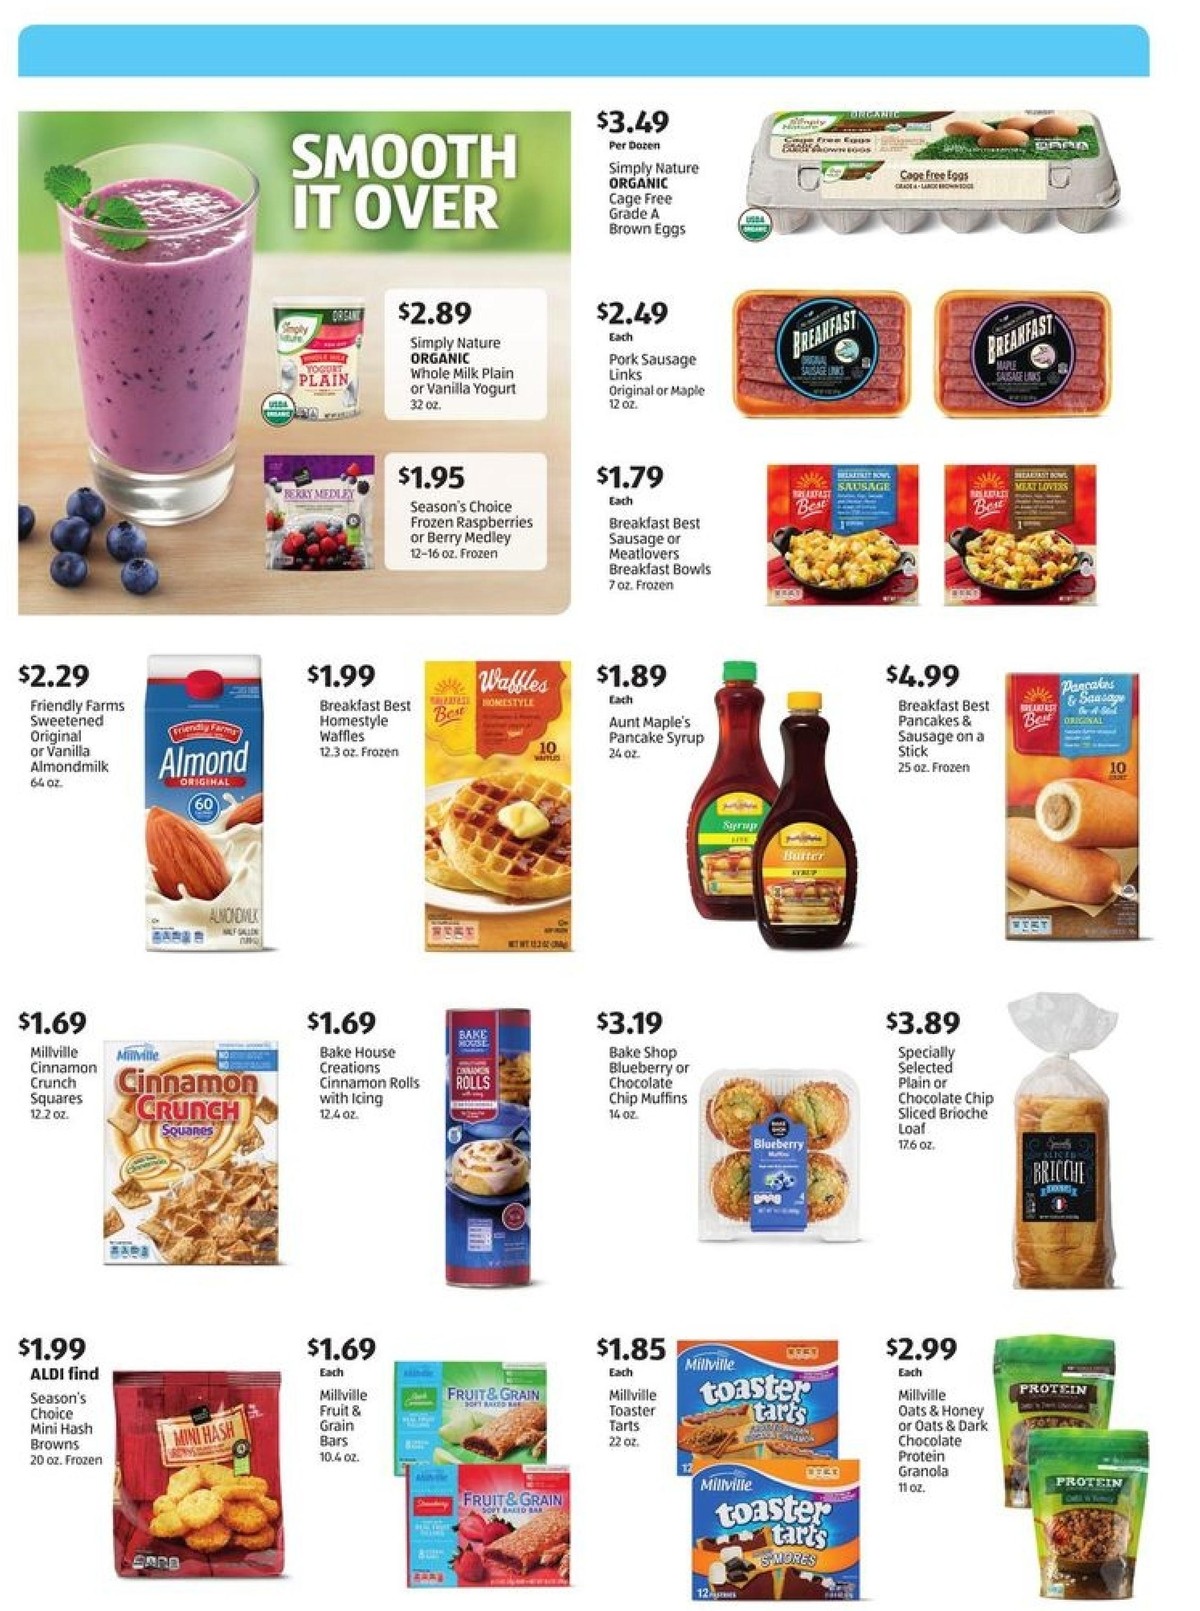 ALDI Weekly Ad from July 28